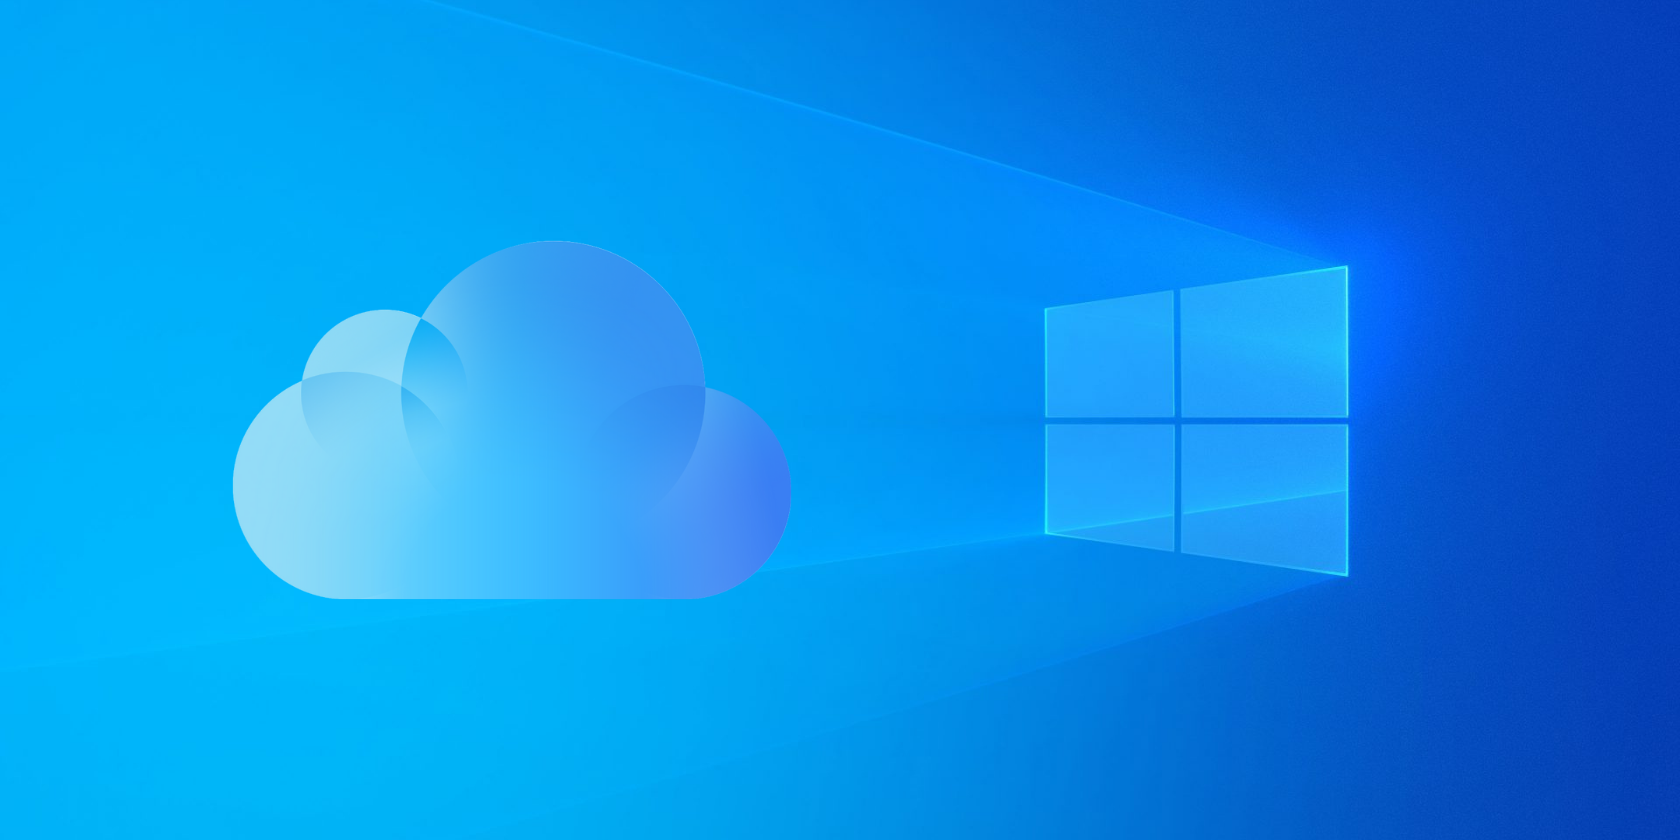 How to Use iCloud With a Windows PC